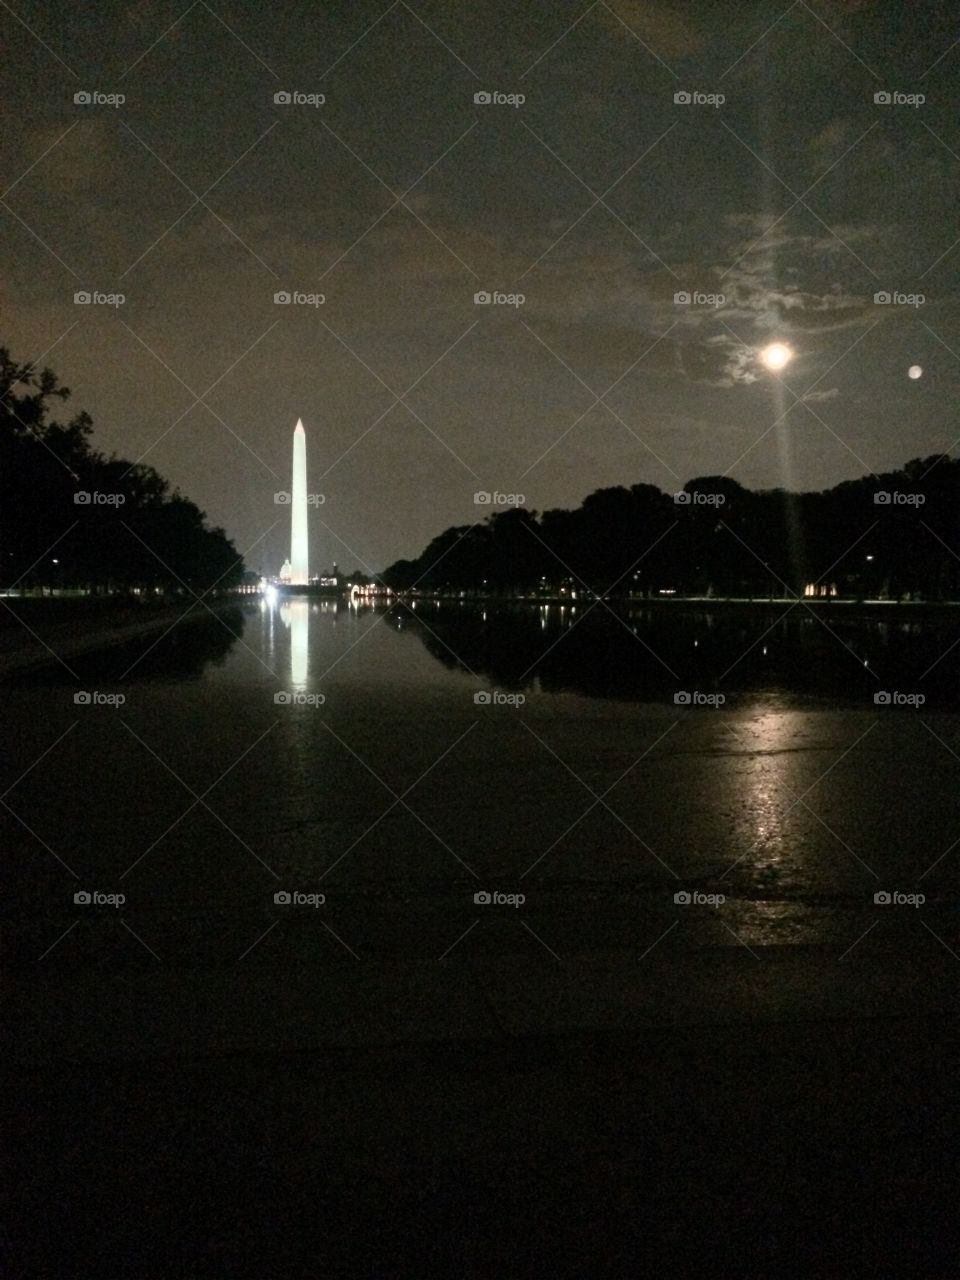 The Reflecting Pool 